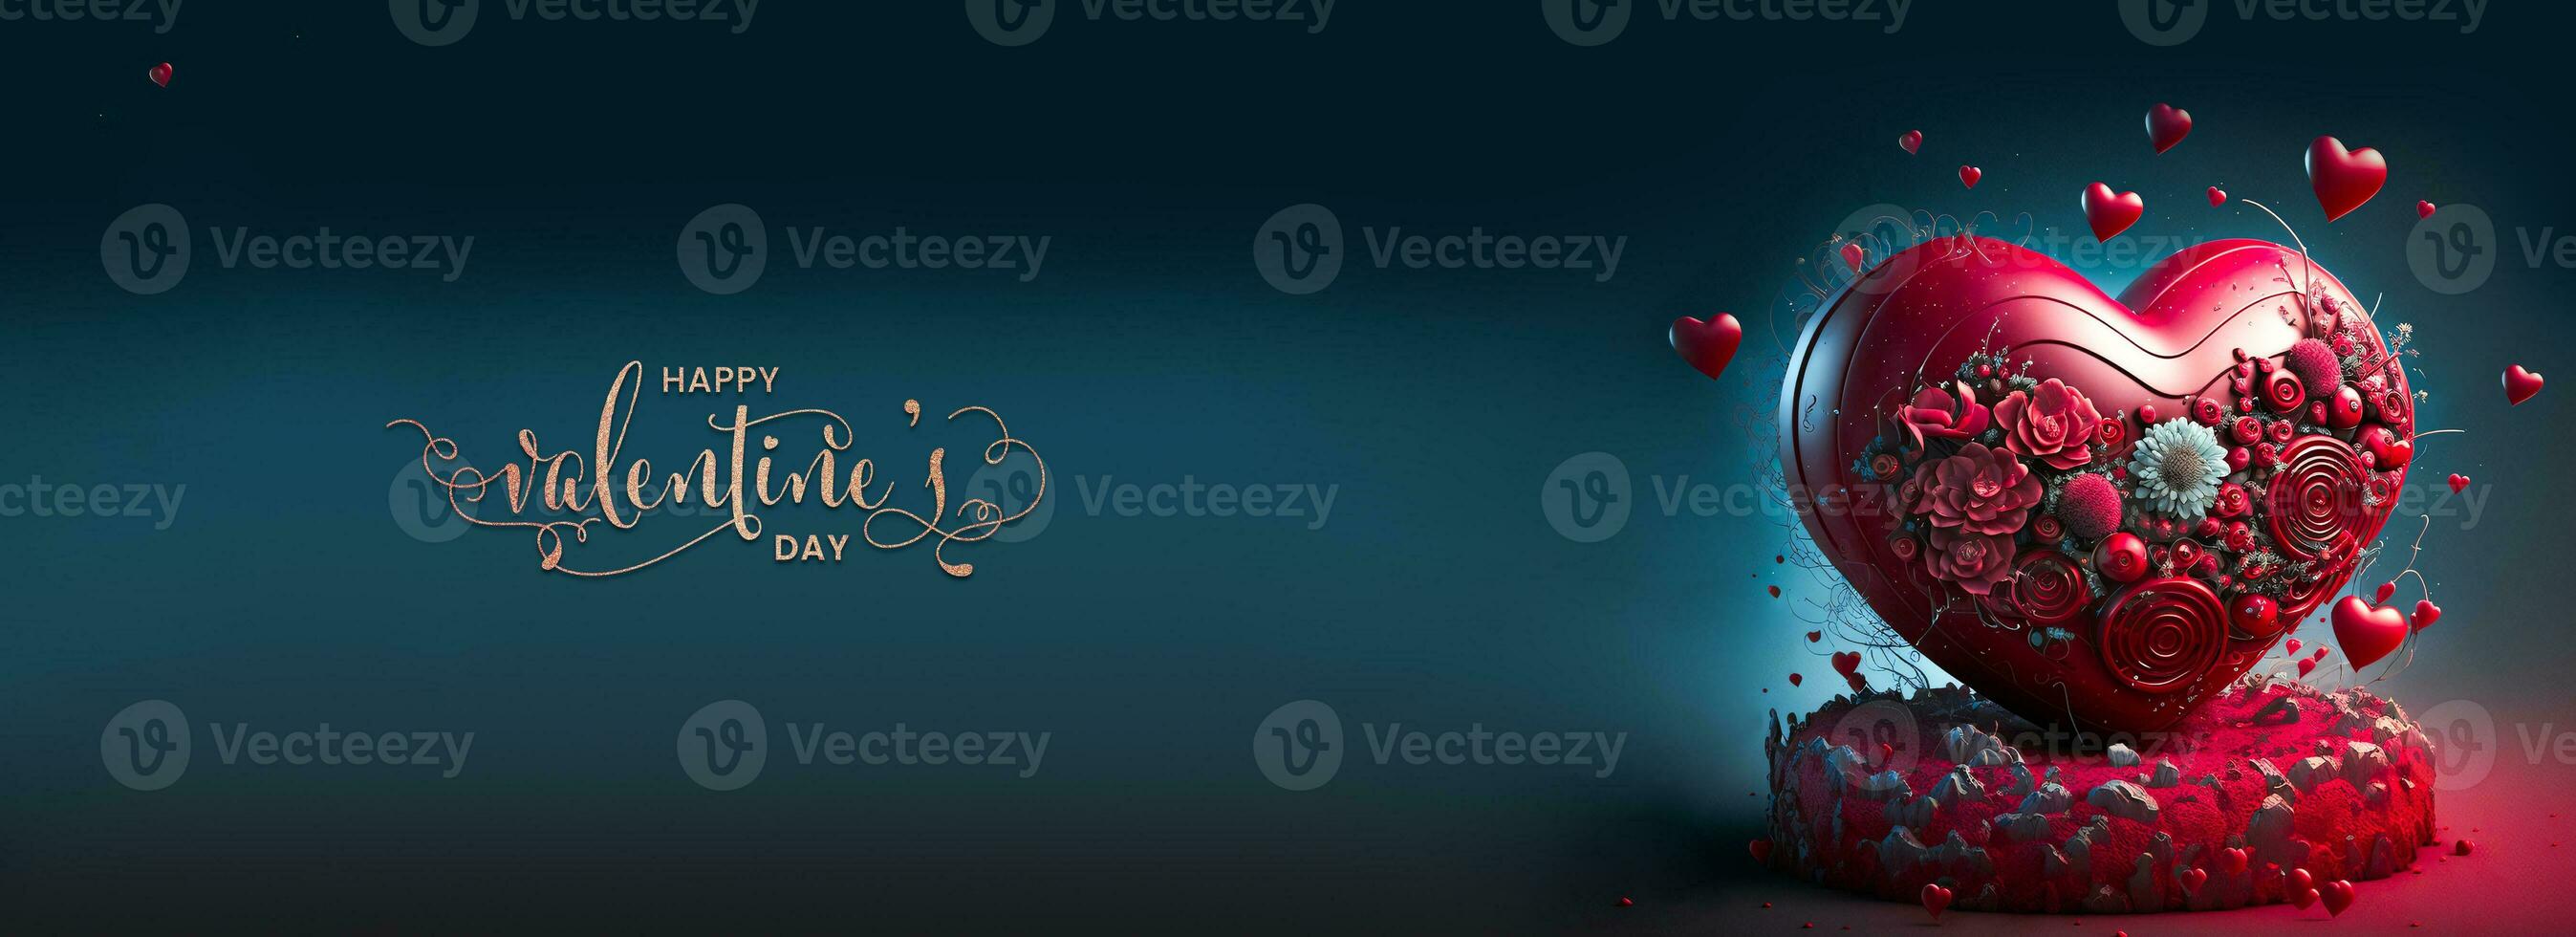 Happy Valentine's Day Text With 3D Render Of Red Heart Shape Decorated With Floral On Podium. photo